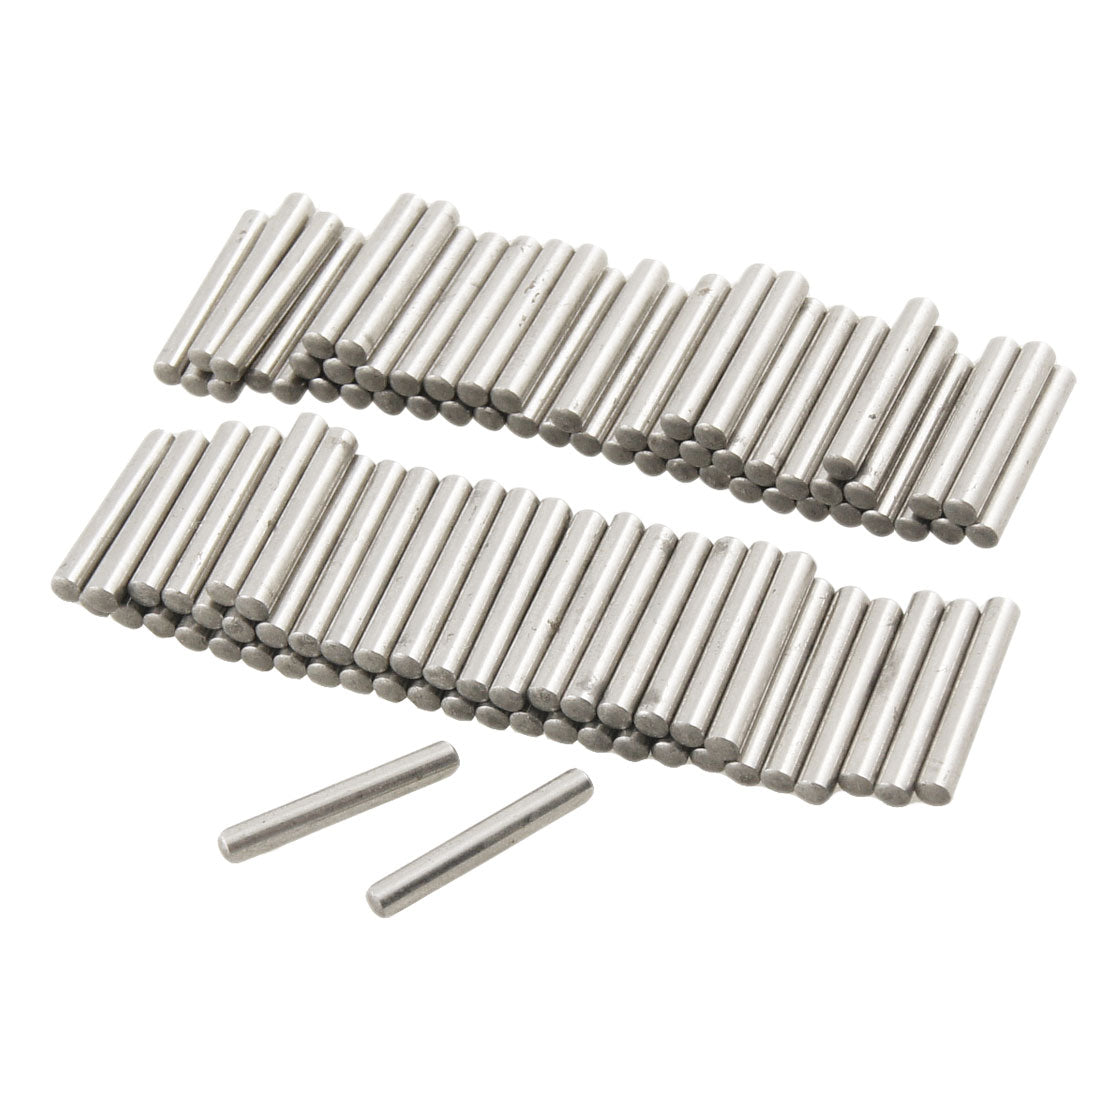 uxcell Uxcell 100 Pcs Stainless Steel 2.6mm x 15.8mm Dowel Pins Fasten Elements